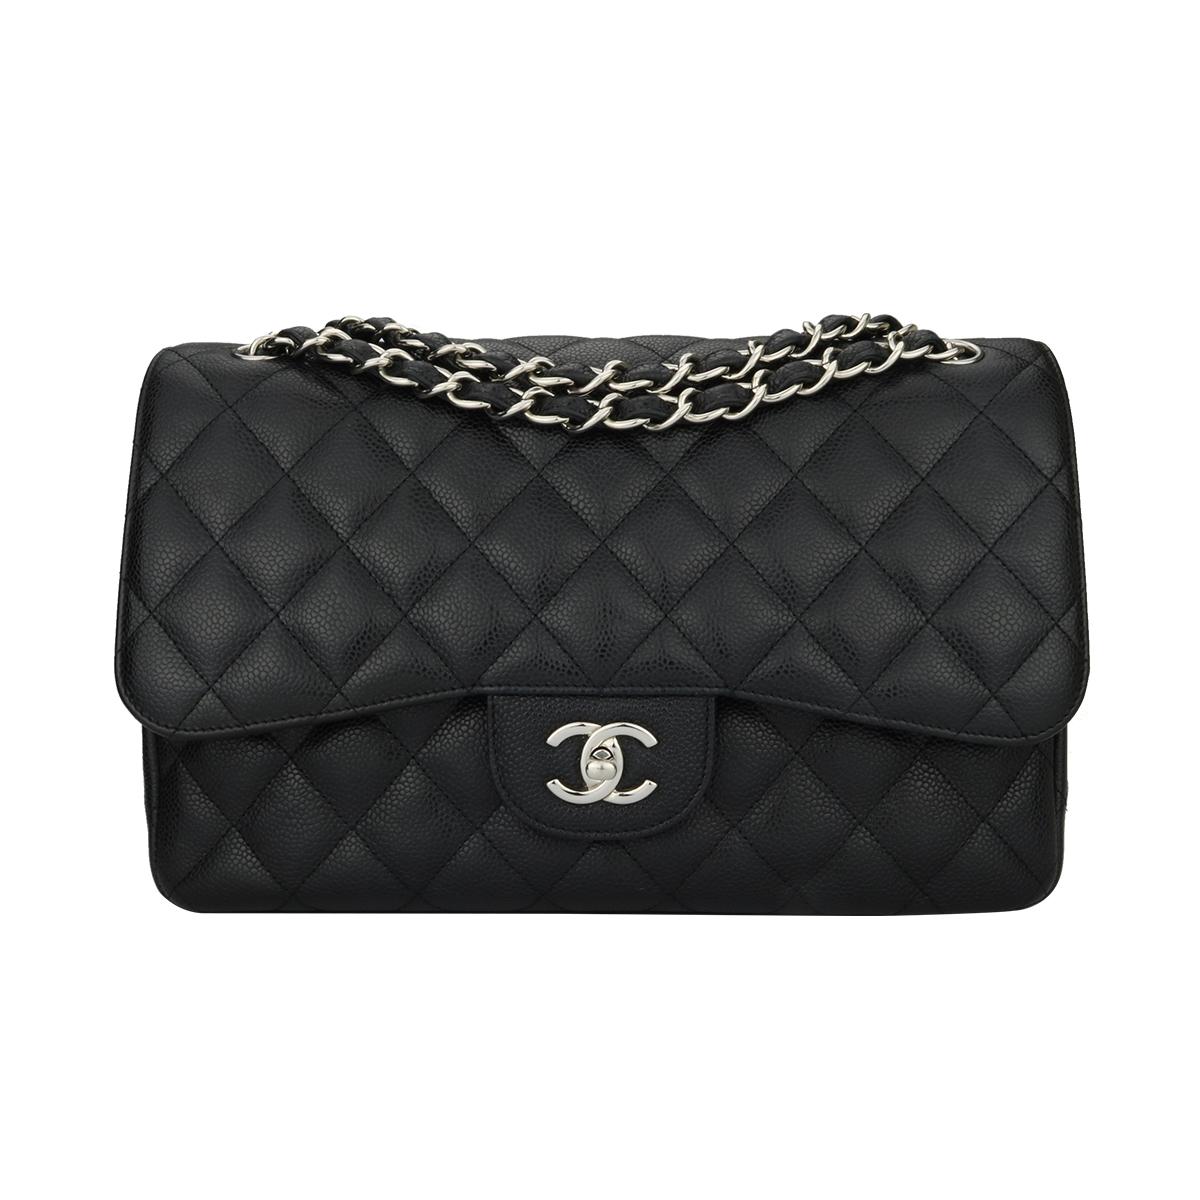 CHANEL Classic Jumbo Double Flap Black Caviar with Silver Hardware 2011